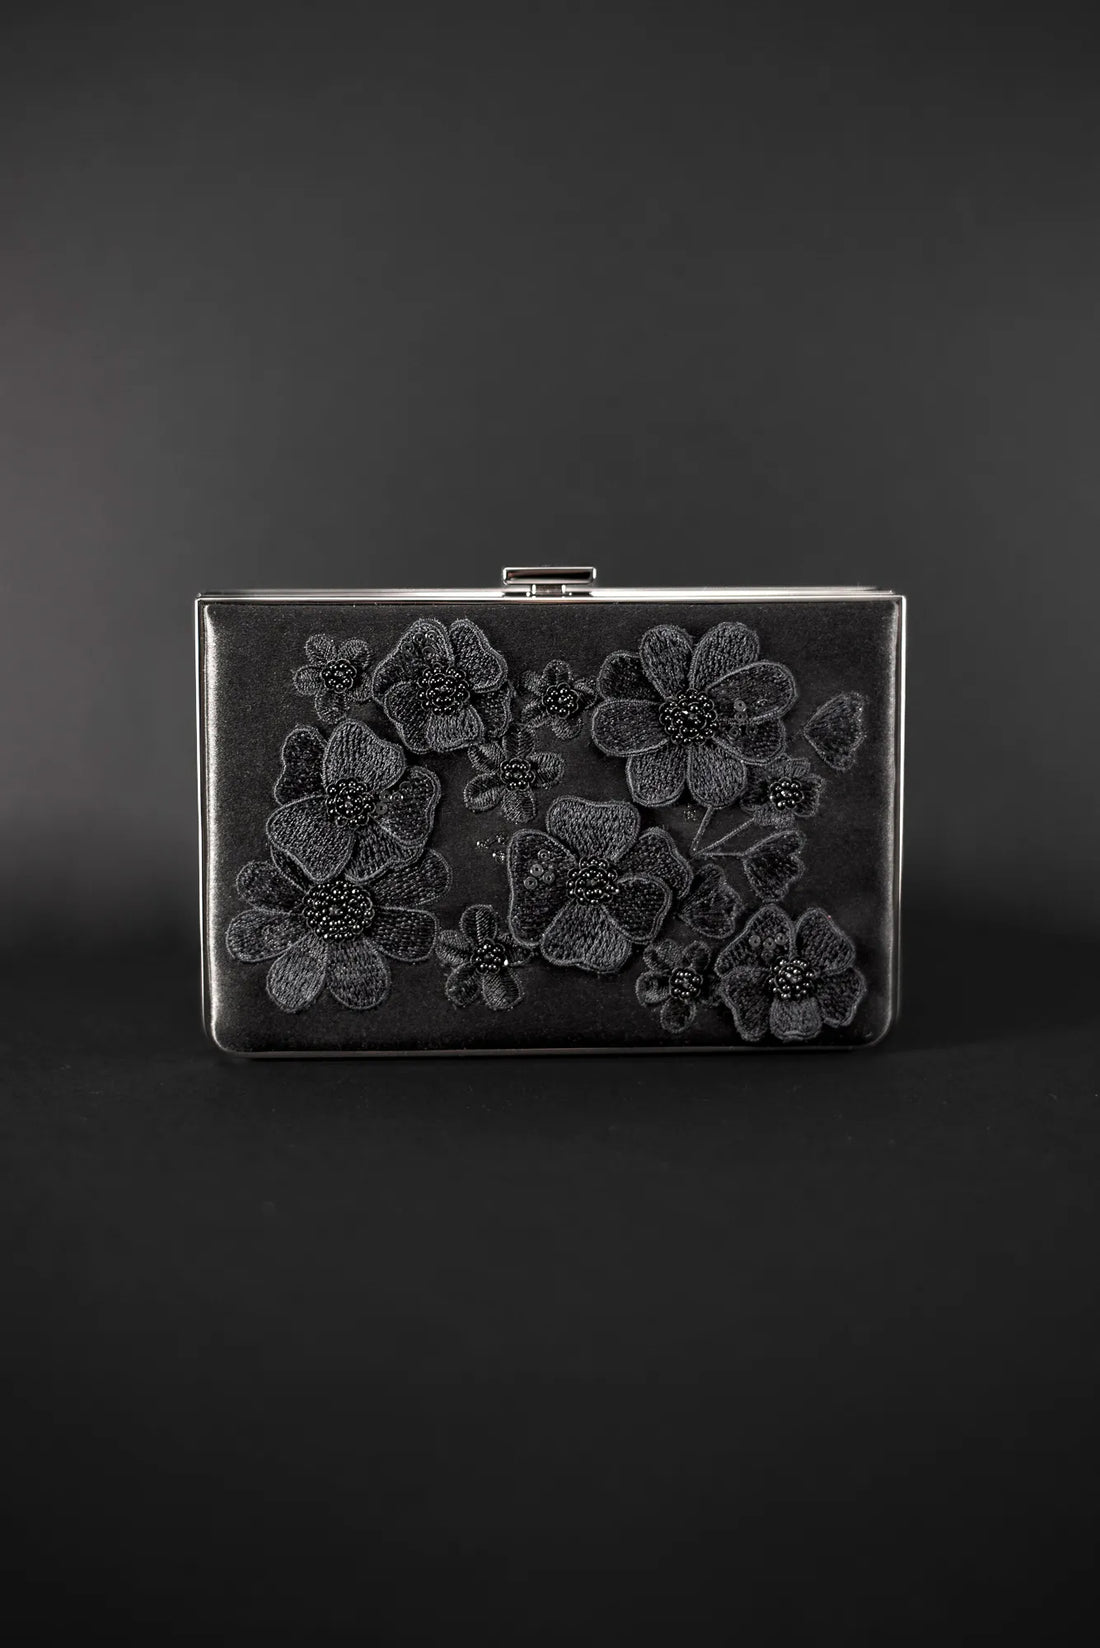 The Venezia Clutch x MICAELA - Black Satin Floral Embroidery is a stylish accessory from the exclusive Bella Rosa Collection. It features stunning 3D floral embroidery, adding a touch of elegance to this chic black bag.